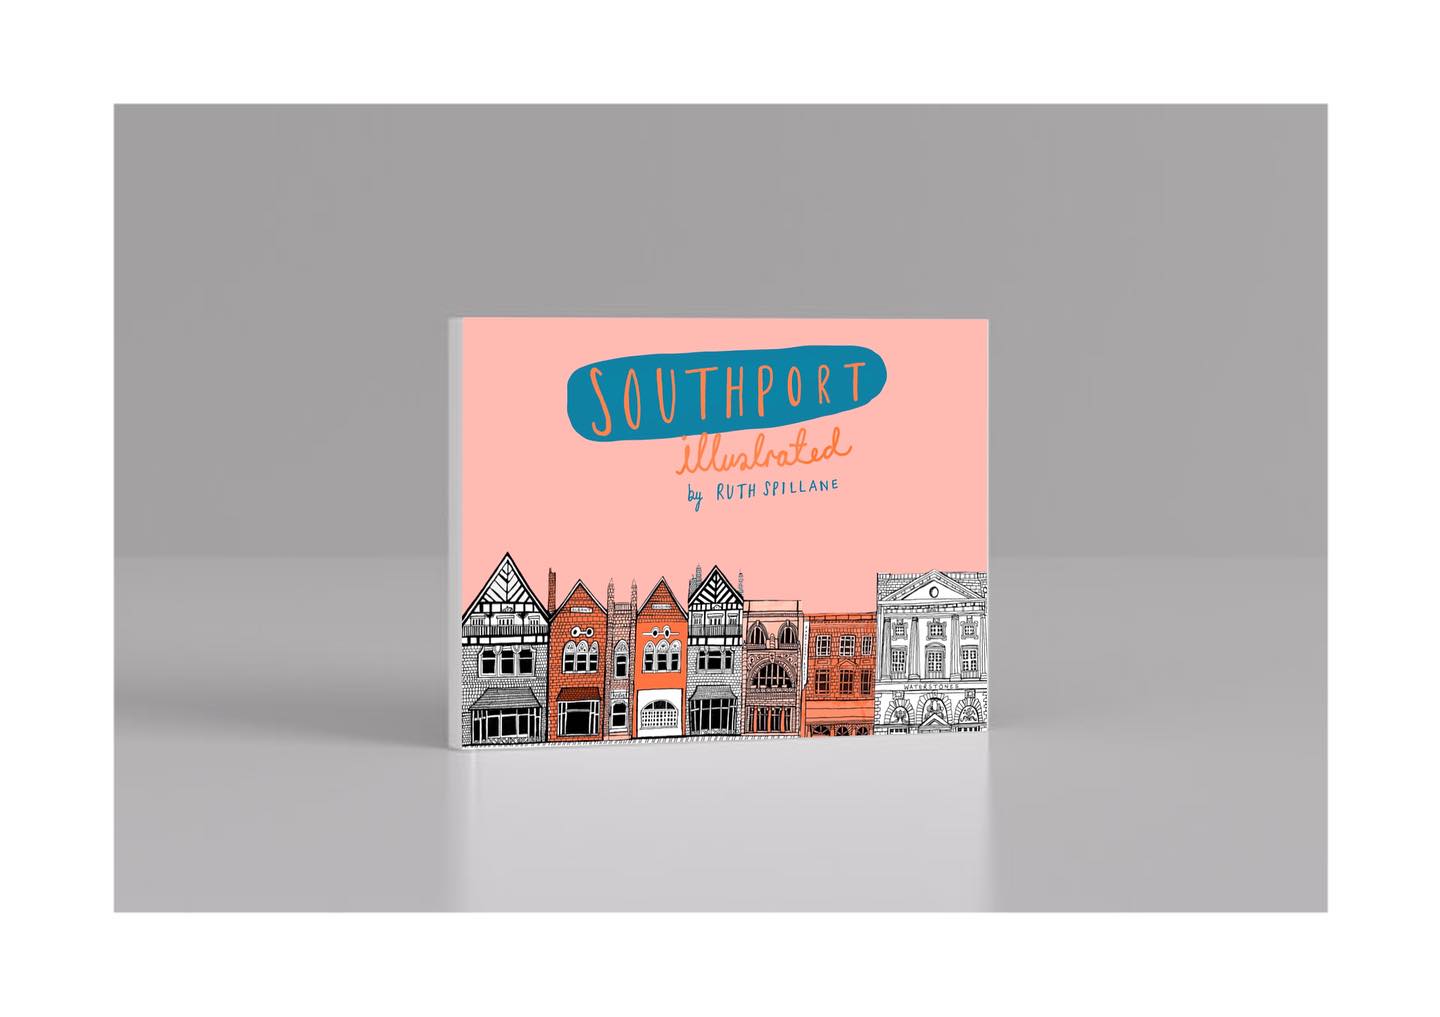 Artist Ruth Spillane is publishing a new book, Southport Illustrated.